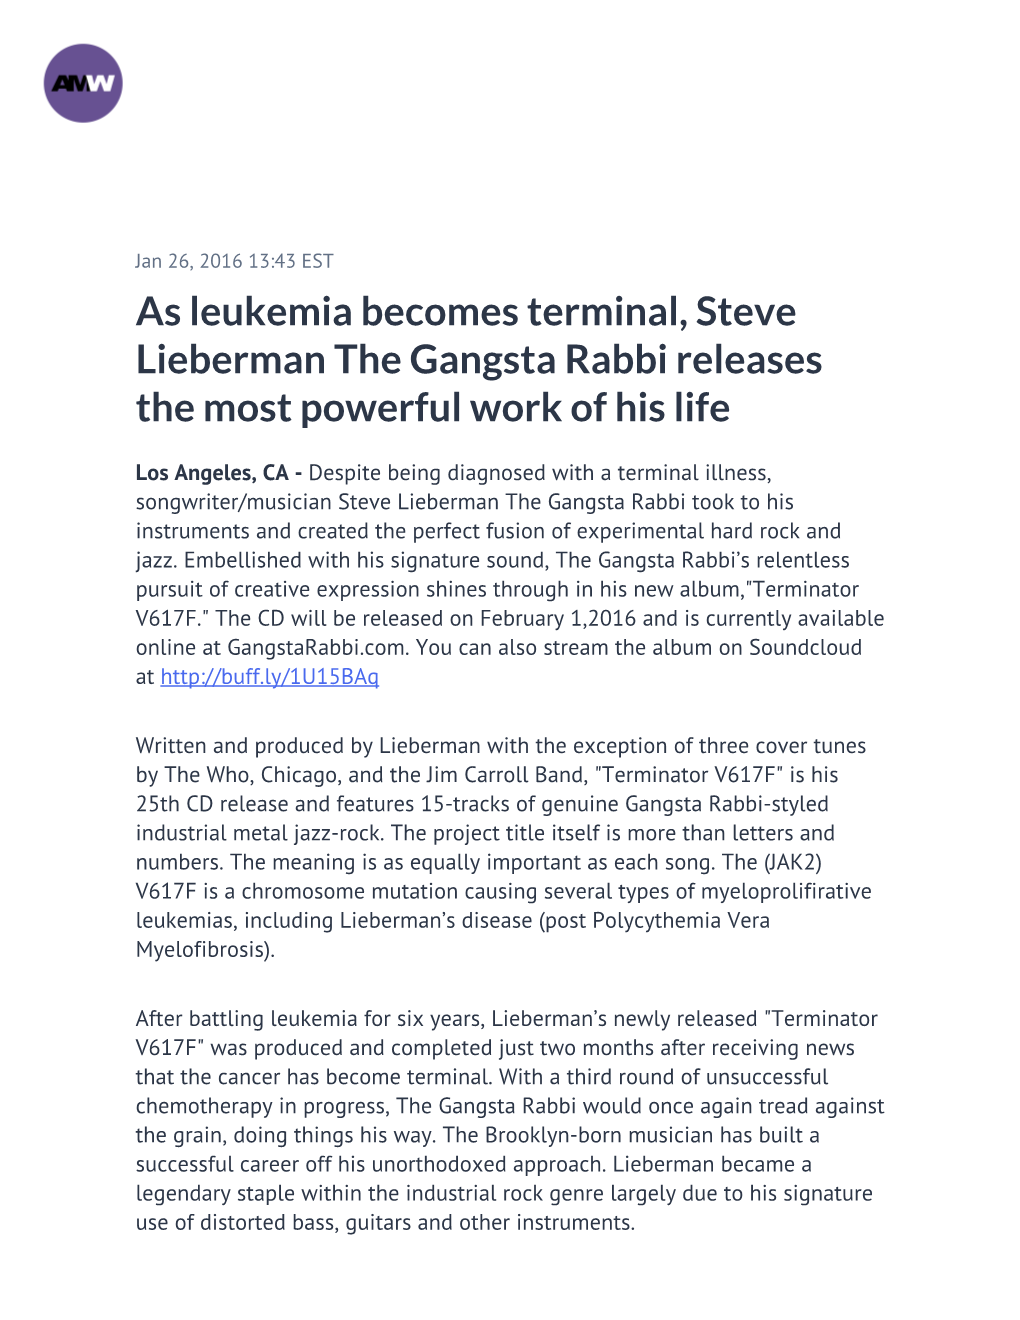 As Leukemia Becomes Terminal, Steve Lieberman the Gangsta Rabbi Releases the Most Powerful Work of His Life